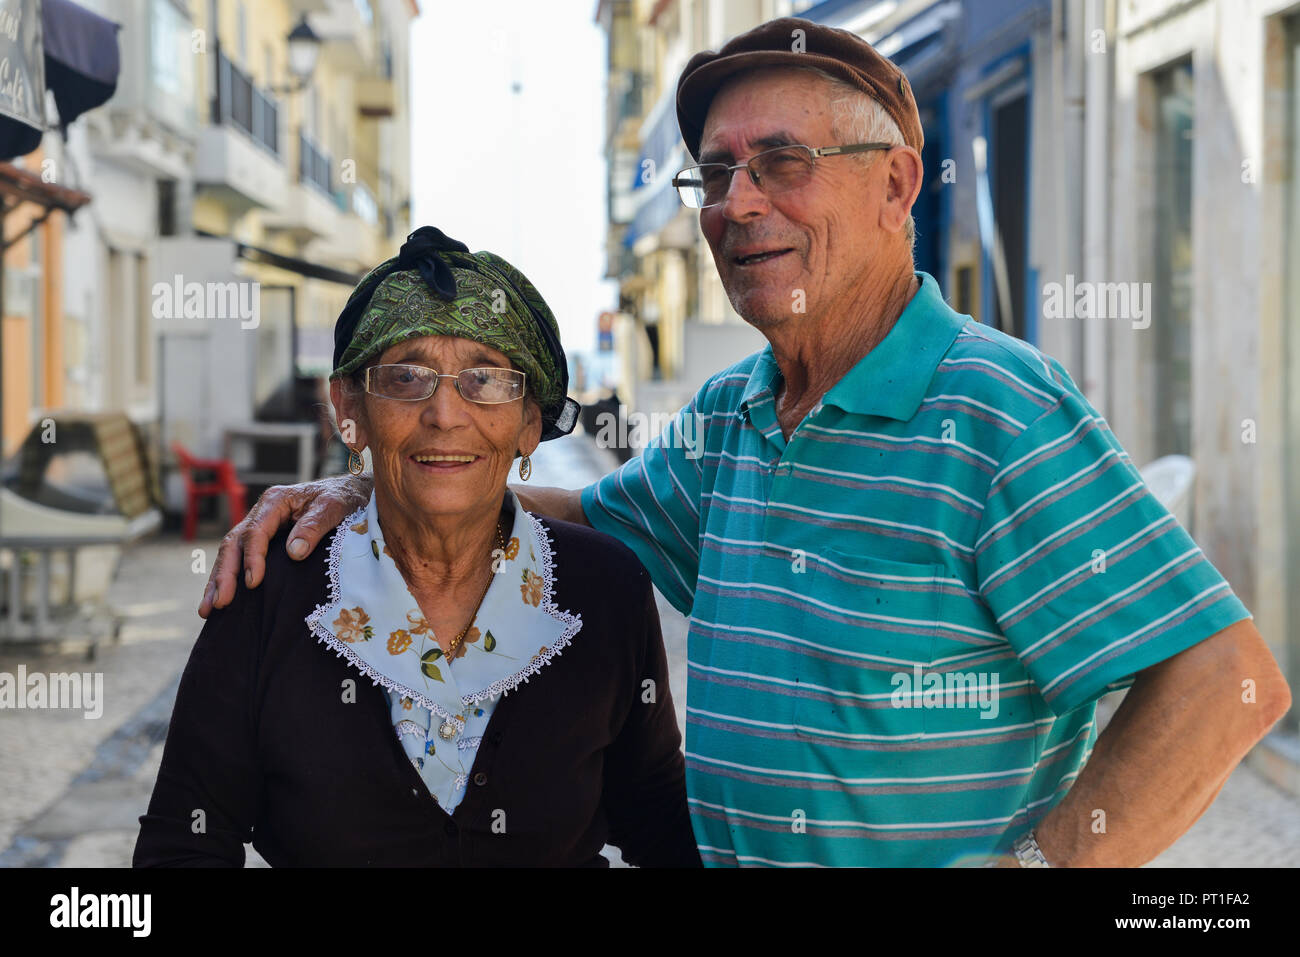 Nazare, Portugal - Sept 25, 2018: Traditionally dressed elderly Portuguese woman and her husband on a cobblestone street of Nazare, Portugal Stock Photo